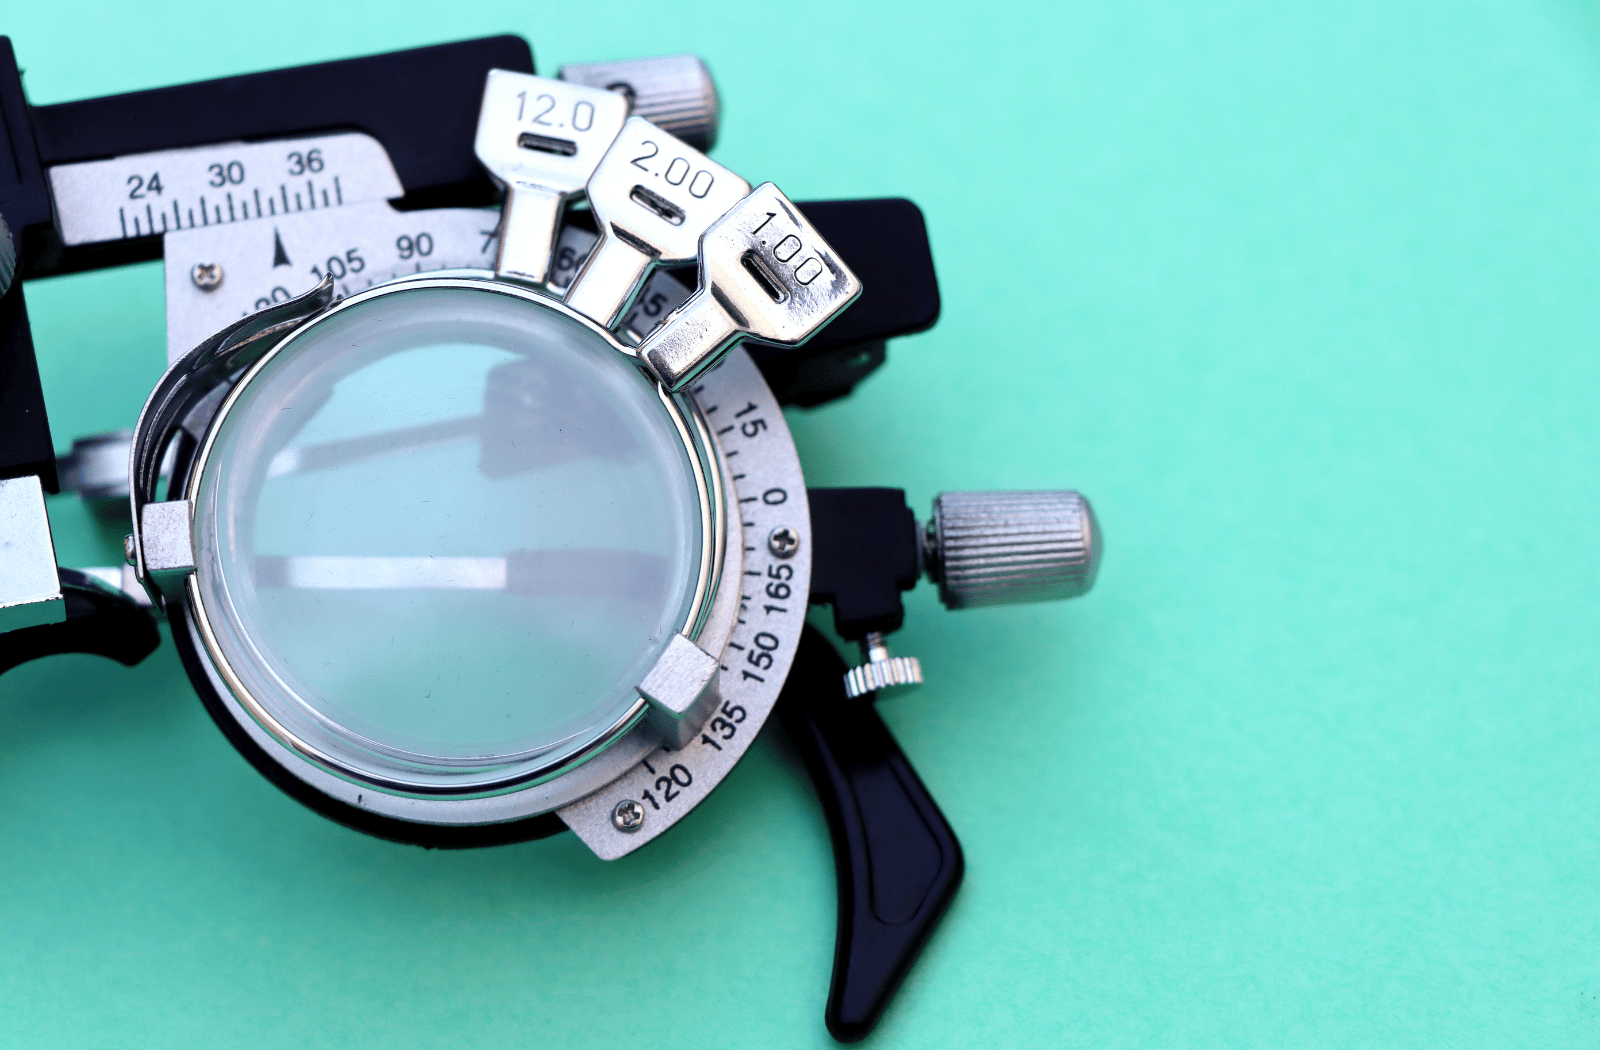 Half of a medical test glasses for high myopia with negative 15 diopters. This optician instrument contains three lenses on it